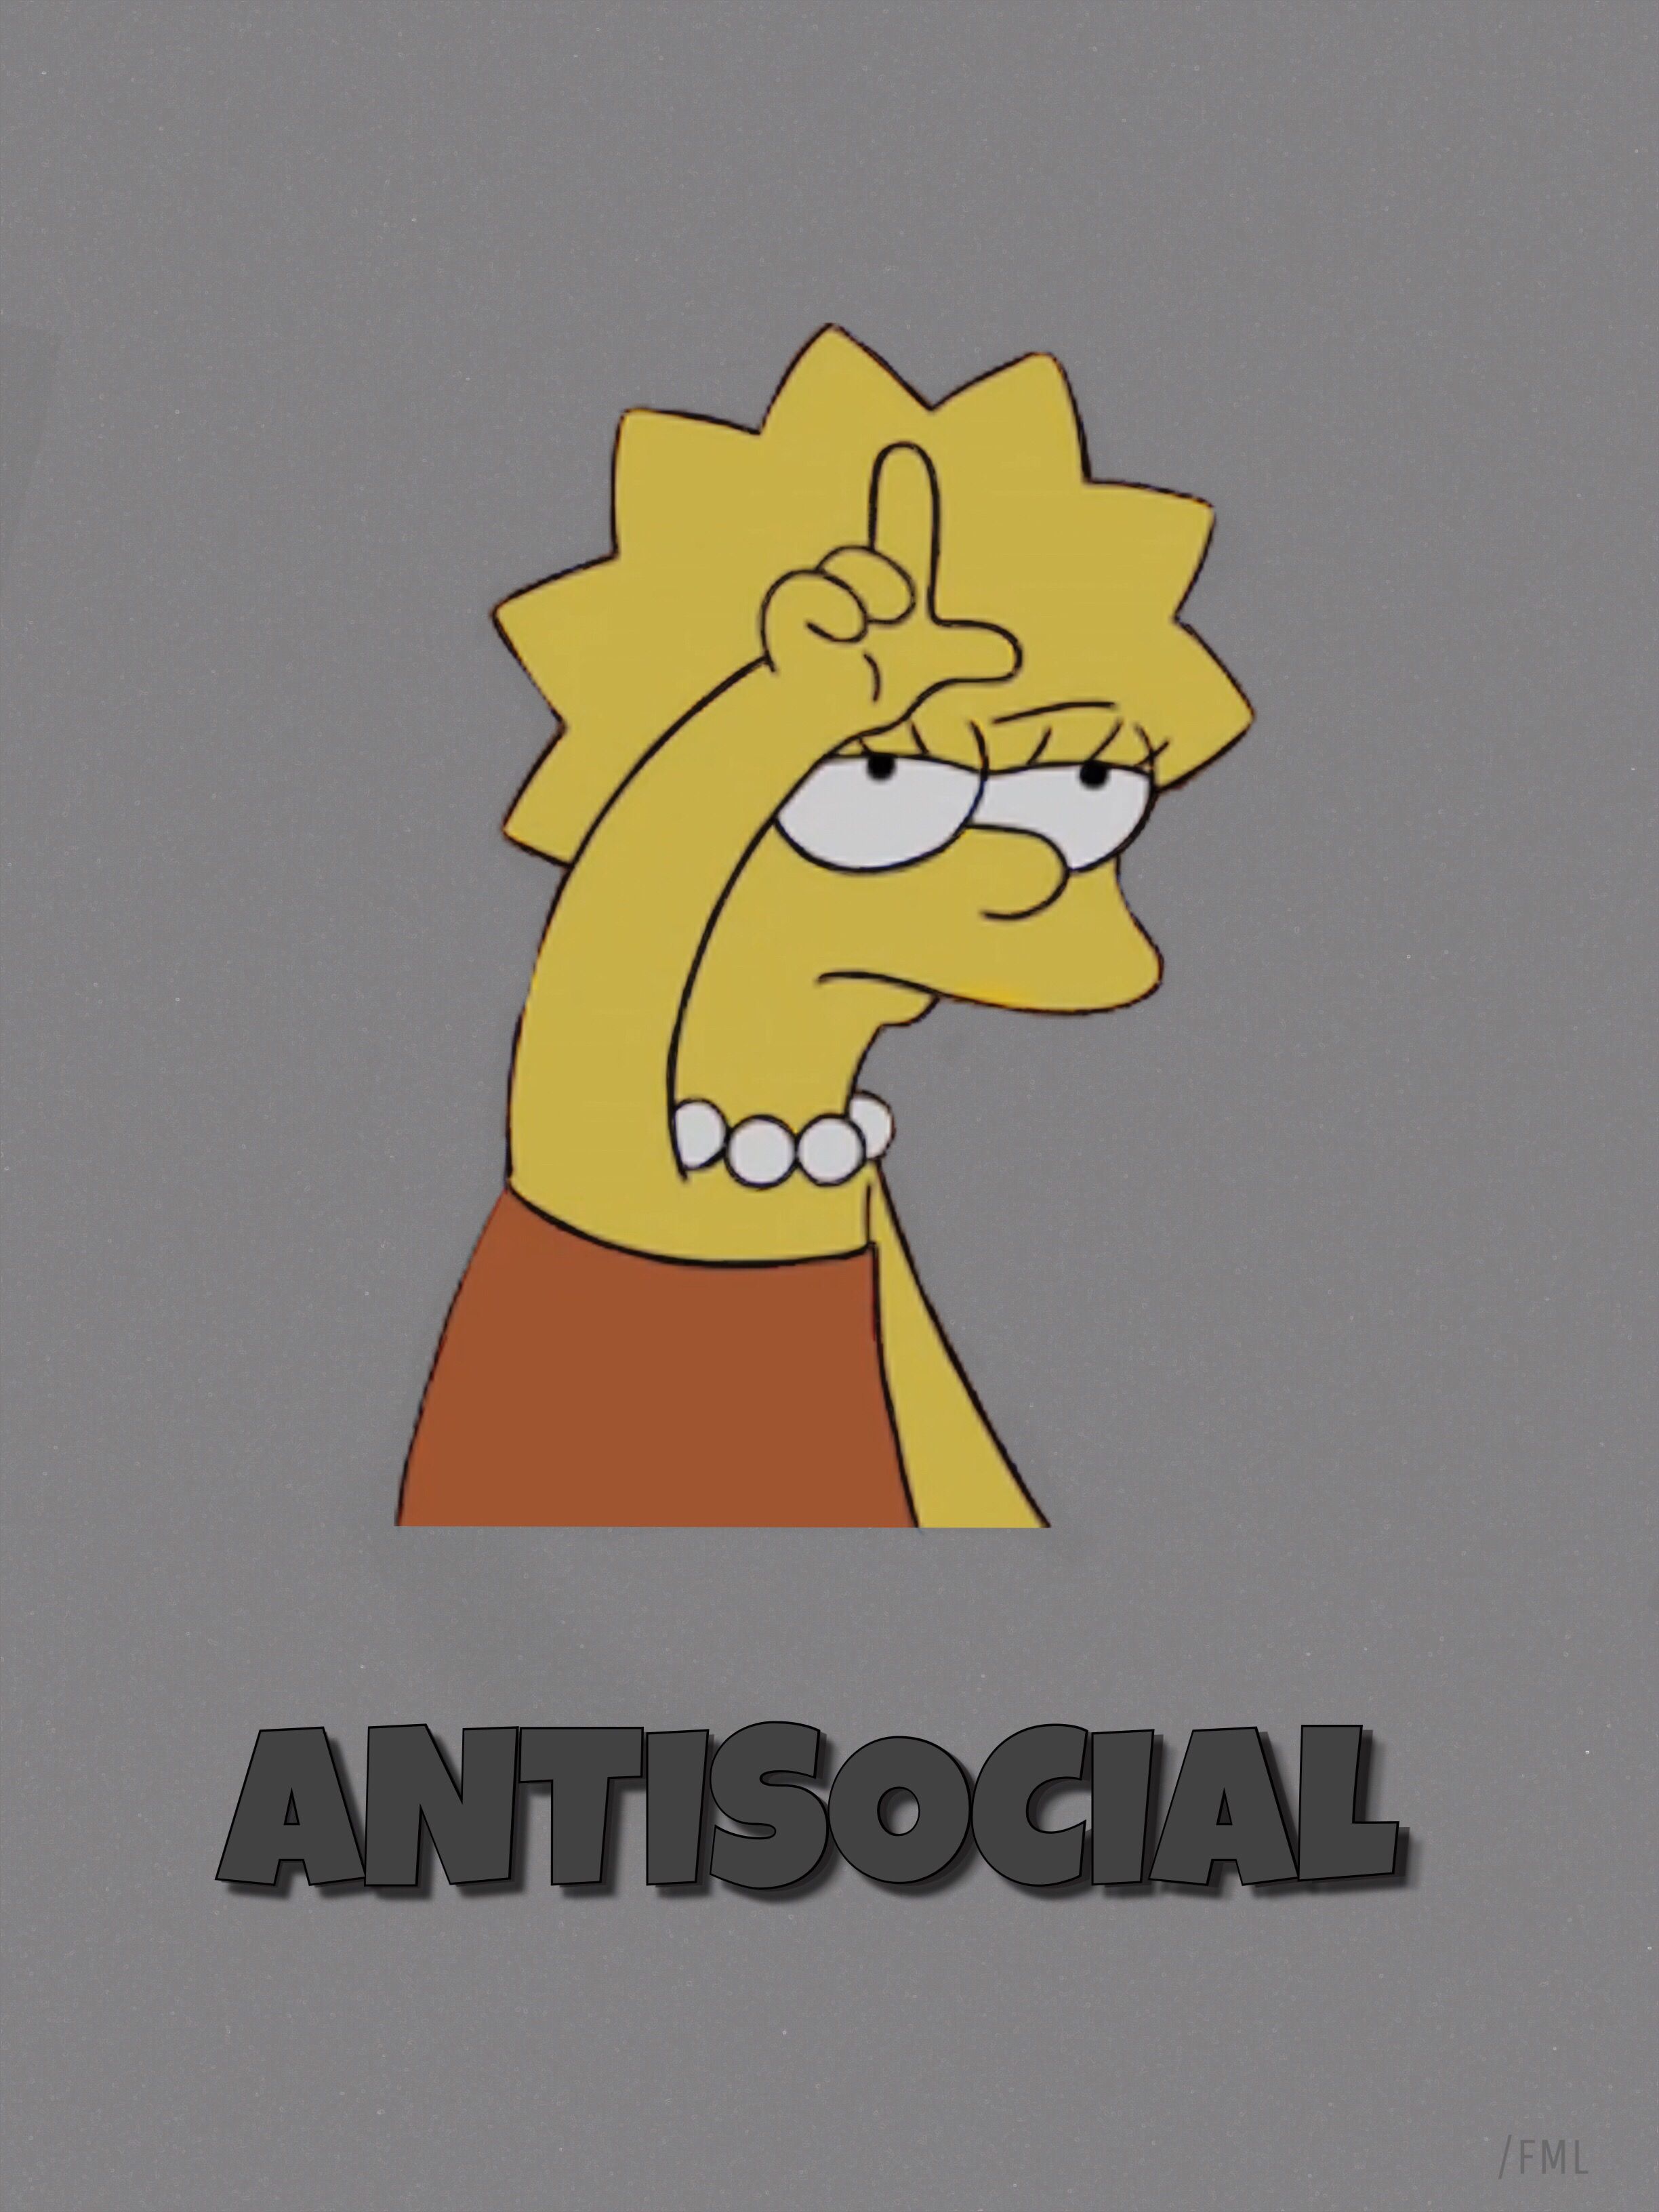 A Lisa Simpson sticker with the word antisocial beneath it. - The Simpsons, Lisa Simpson